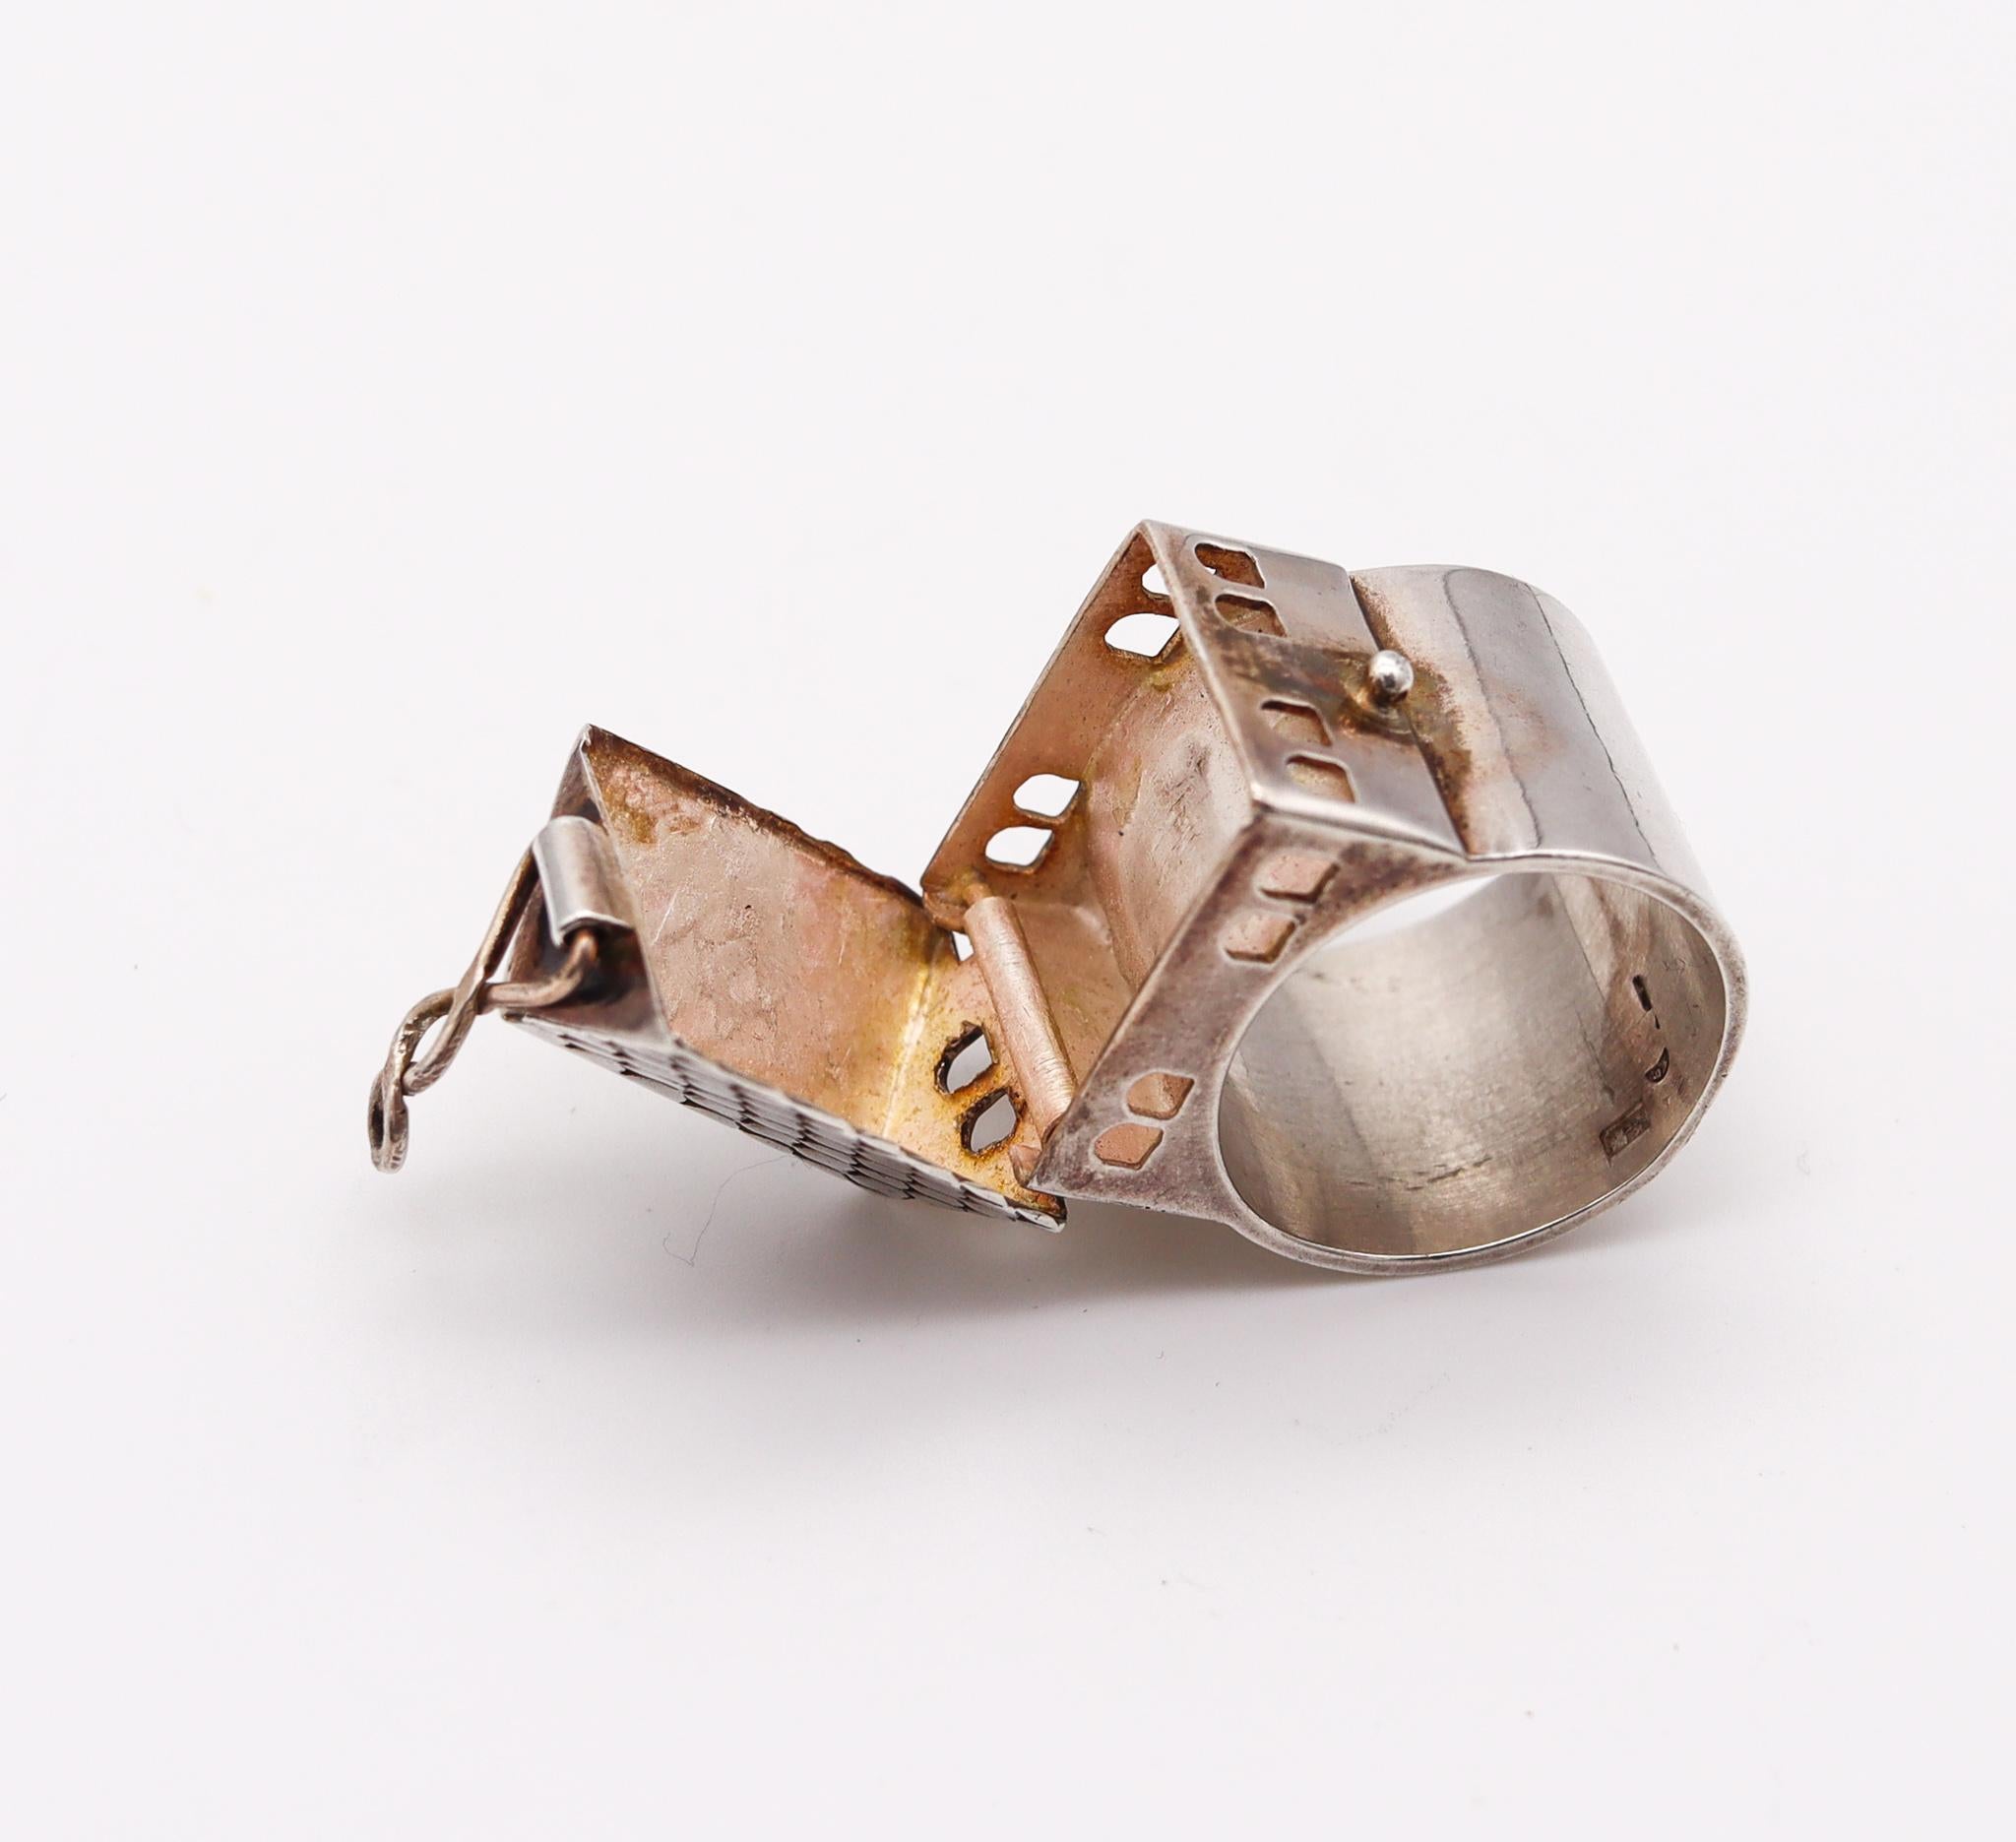 Hebrew wedding house-box ring.

A vintage three-dimensional piece, crafted in solid .925/.999 sterling silver. This traditional Hebrew wedding ring was made up in the shape of a house and fitted with a secret compartment with a hinged lid and a